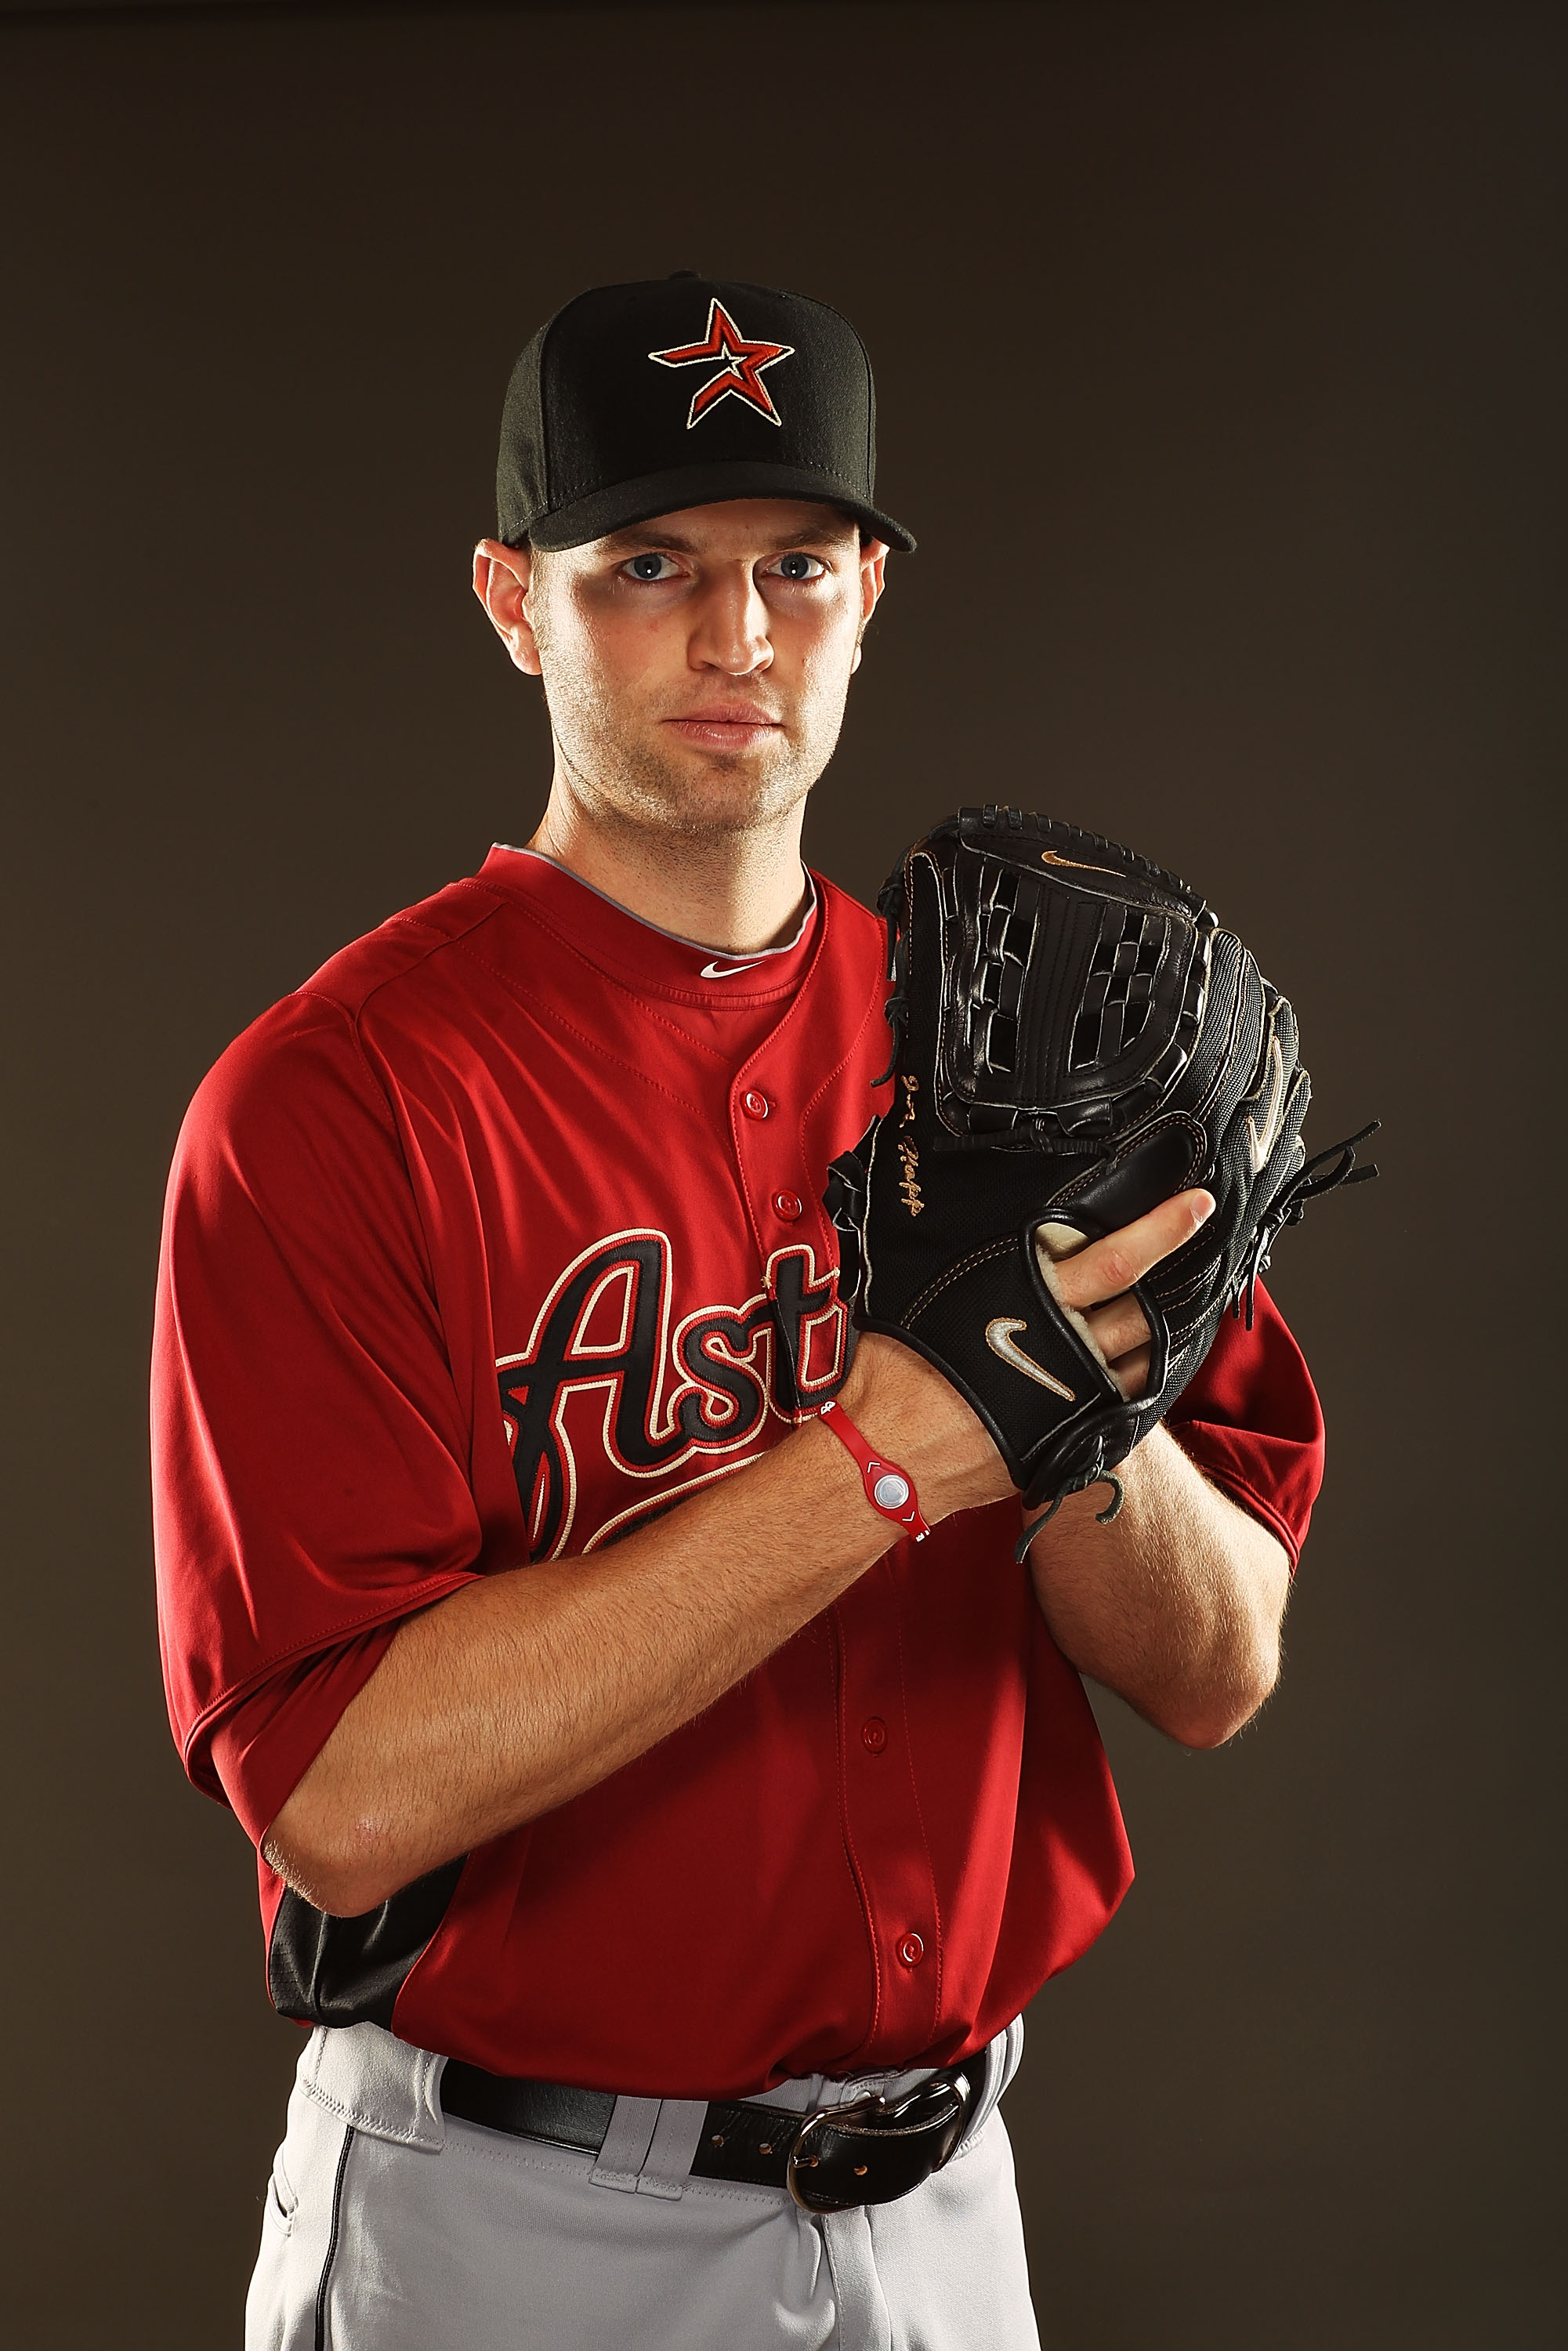 KISSIMMEE, FL - FEBRUARY 24:  J.A. Happ #30 of the Houston Astros poses for a portrait during Spring Training photo Day at Osceola County Stadium  on February 24, 2011 in Kissimmee, Florida.  (Photo by Al Bello/Getty Images)